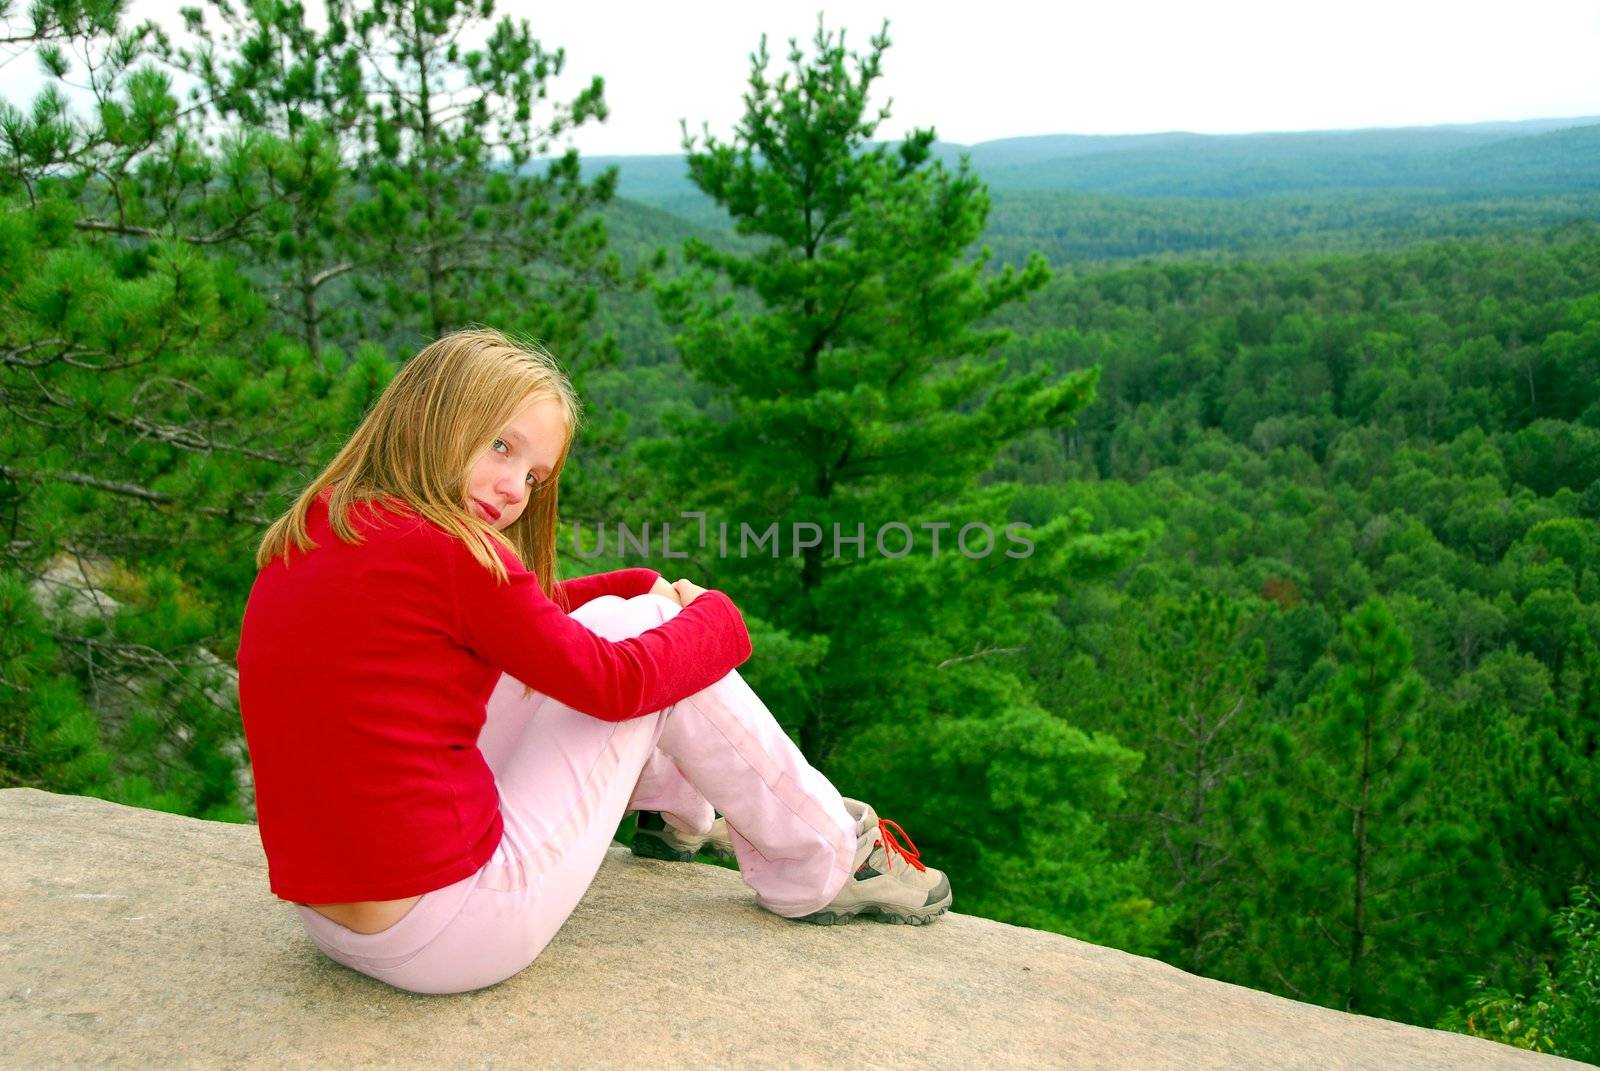 Young girl sitting on an edge of a cliff